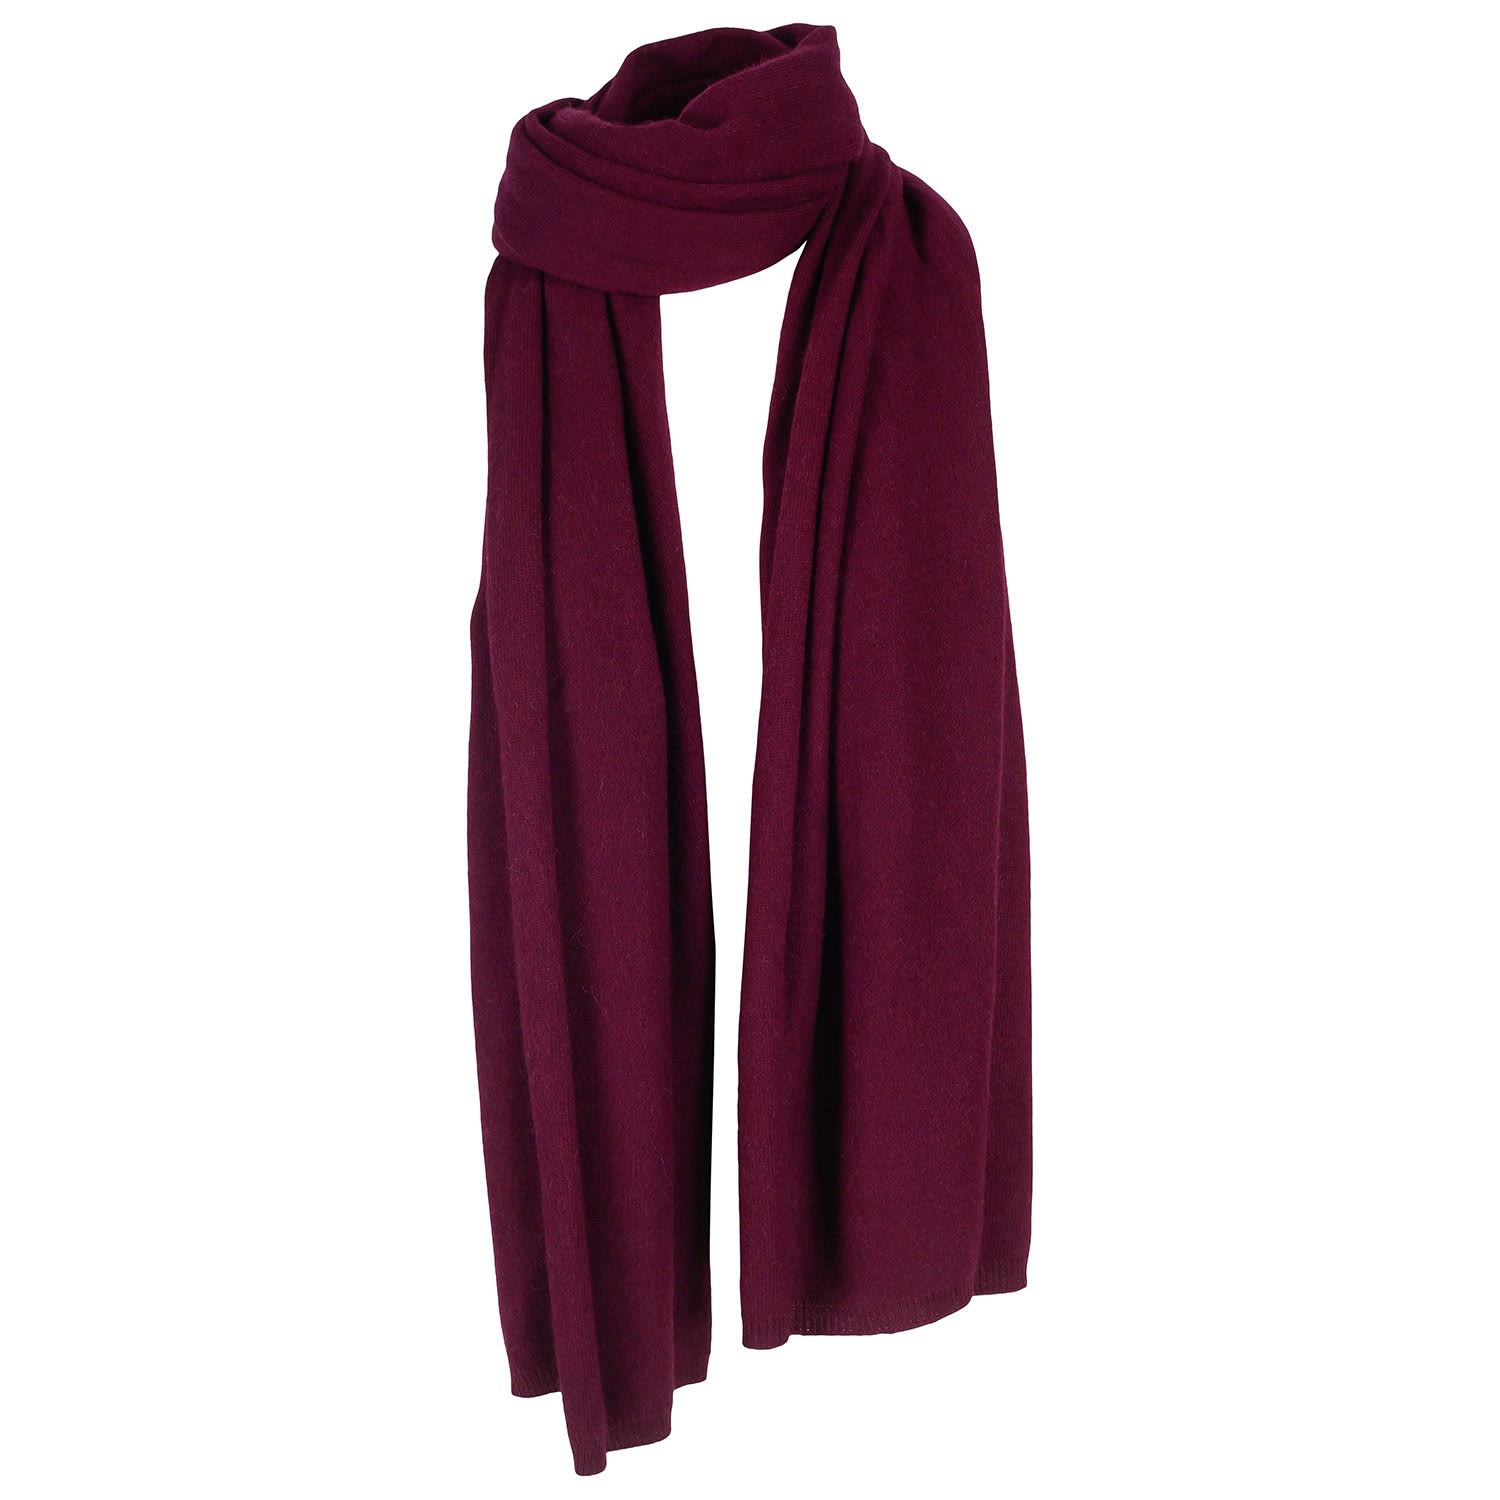 Women’s Pink / Purple "Alfie" Large Cashmere Scarf - Plum One Size Tirillm